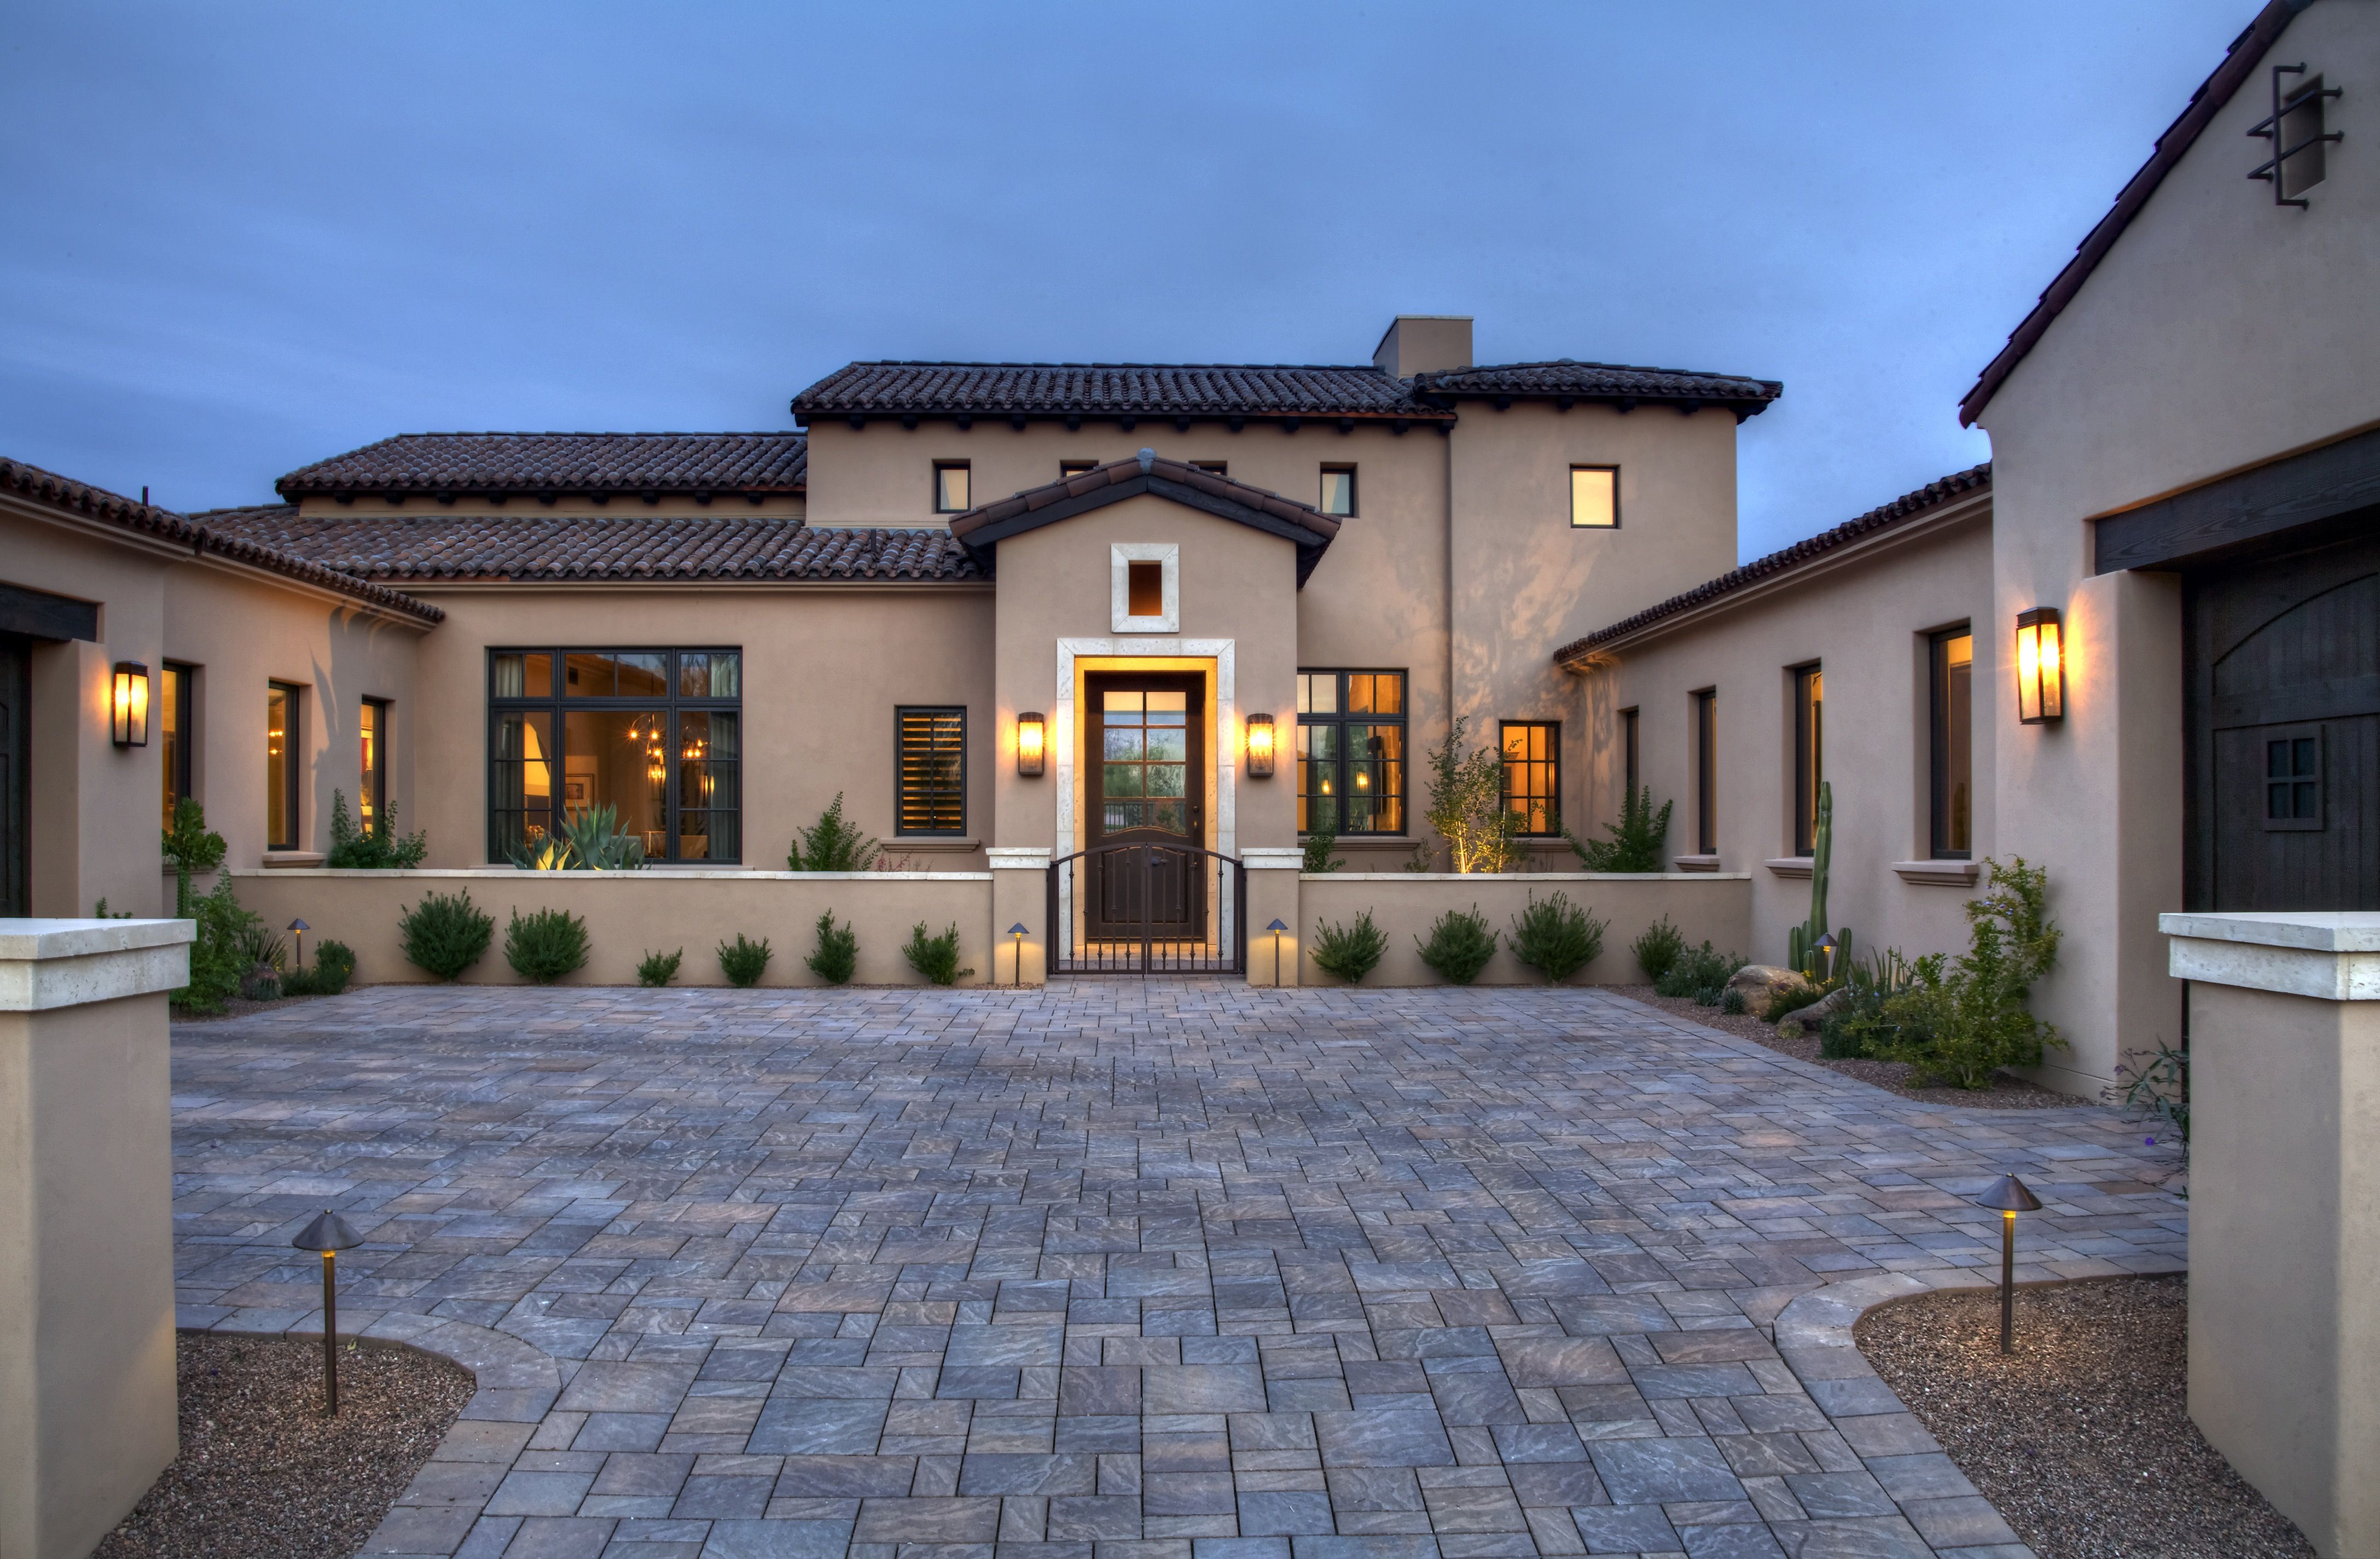 Minimalist Mediterranean Stucco Home With Spanish Tile Rooftop (View 28 of 30)